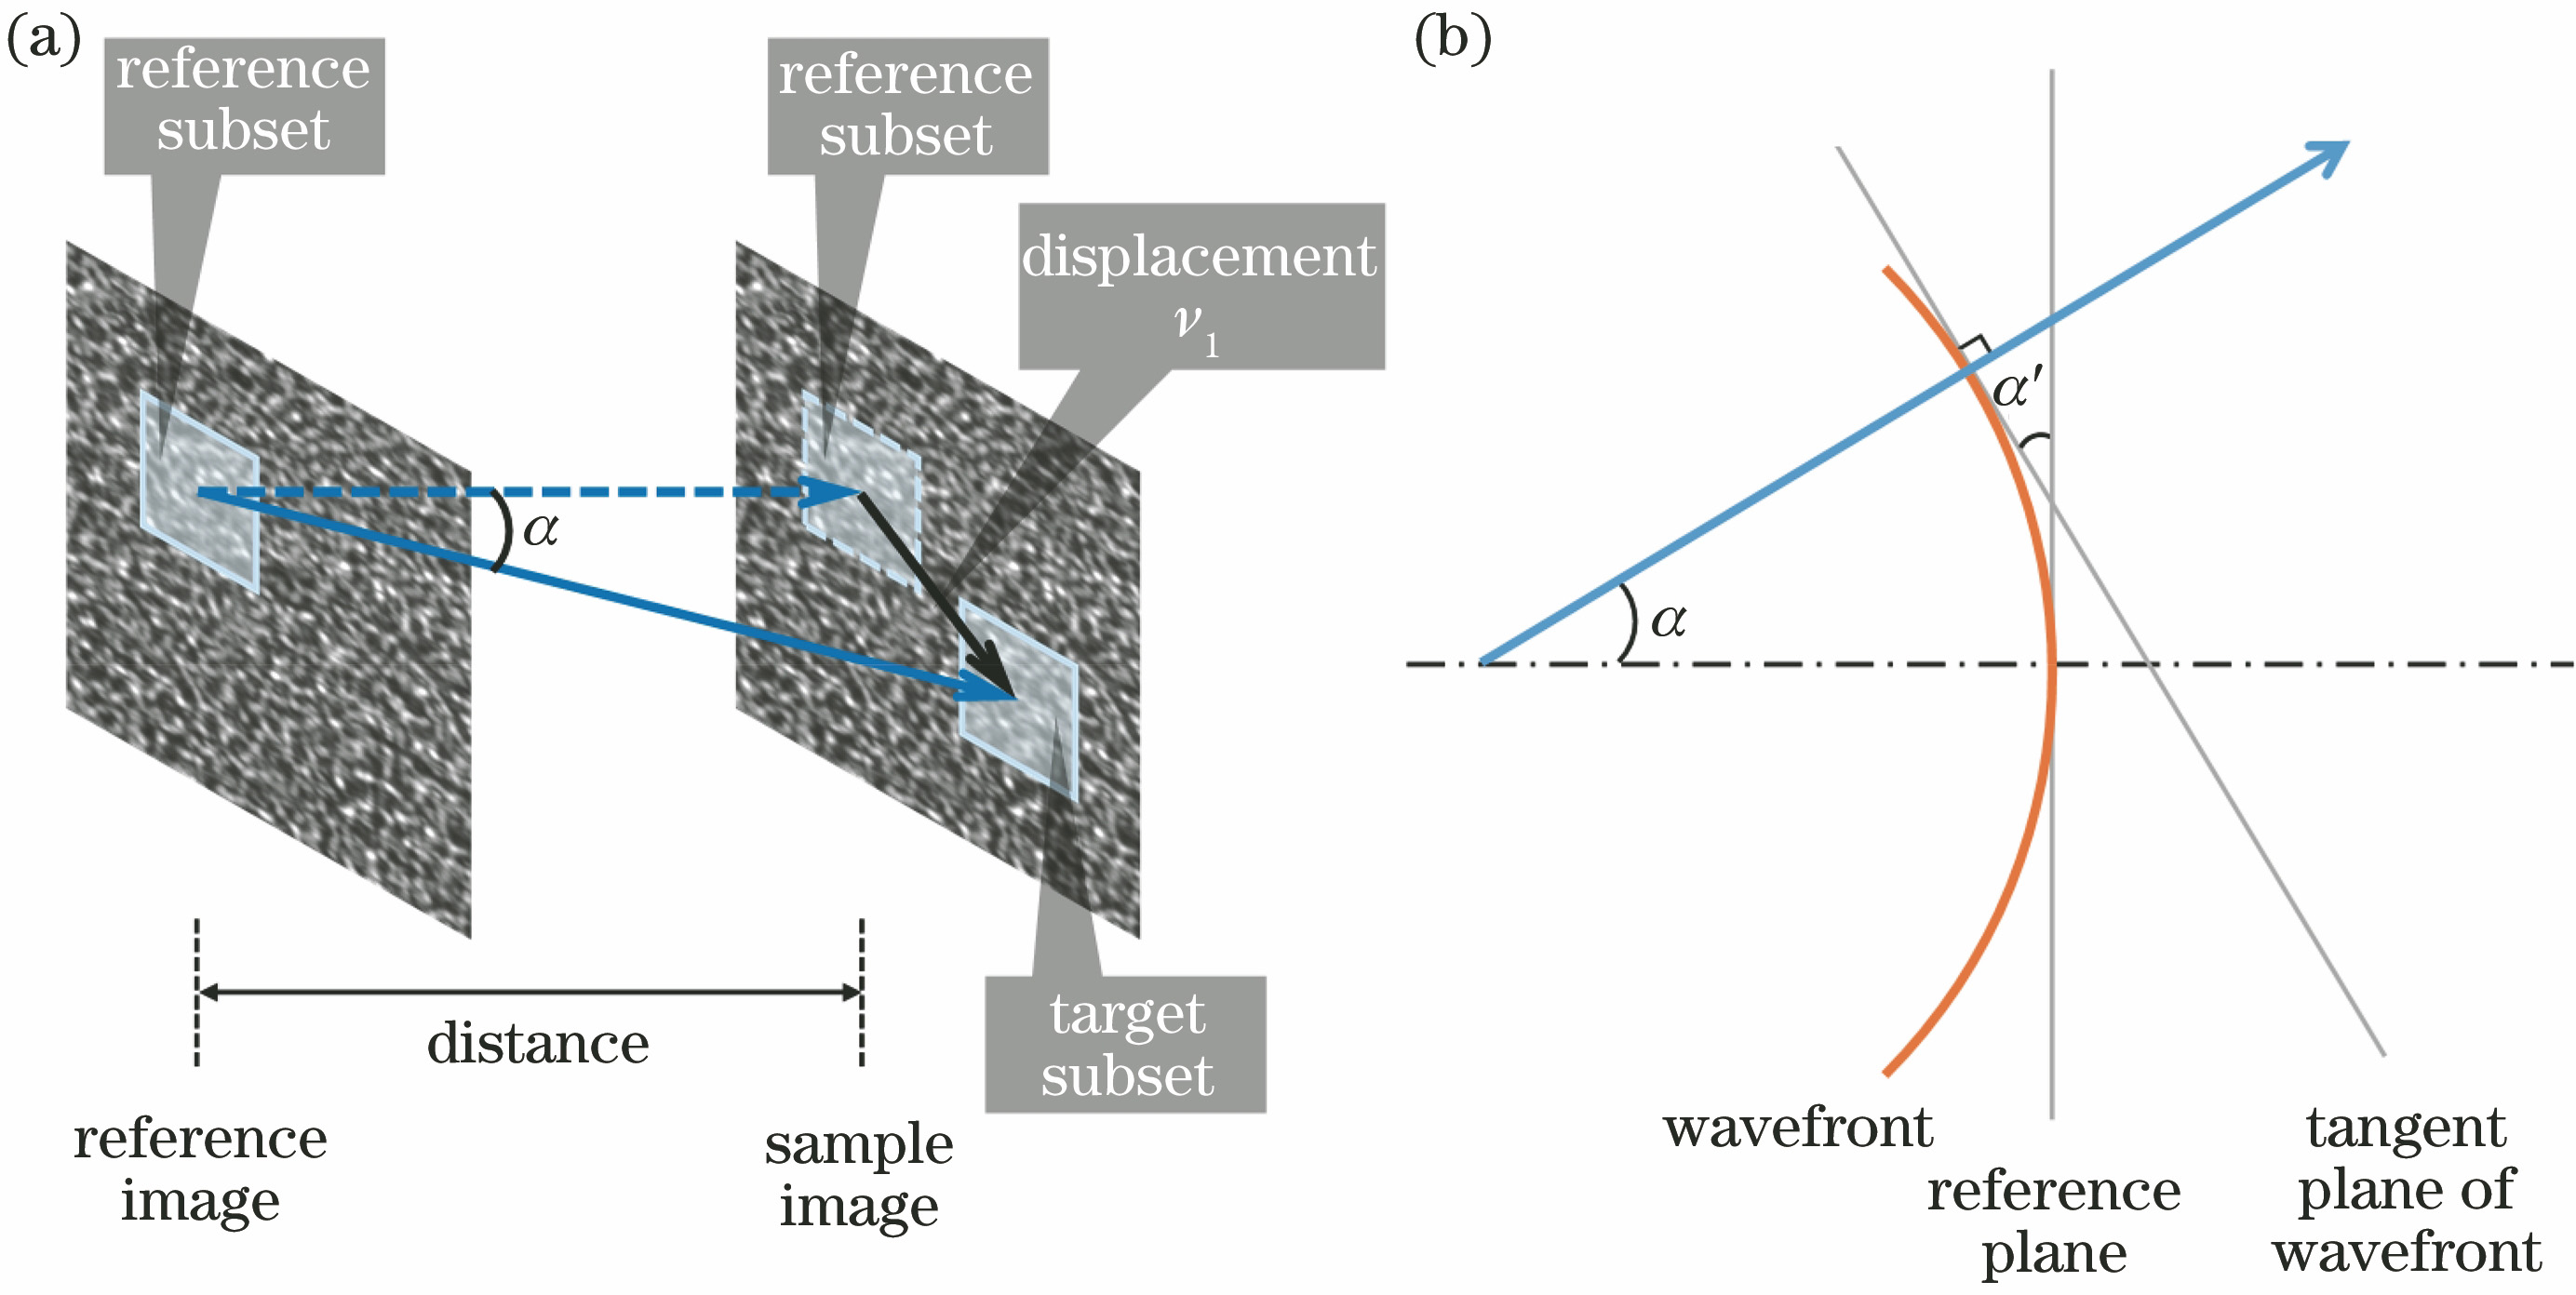 Schematic diagram of wavefront reconstruction using X-ray near-field speckle. (a) Speckle displacement v1 and refraction angle α measured by matching reference subset and target subset; (b) schematic diagram of wavefront reconstruction using refraction angle α